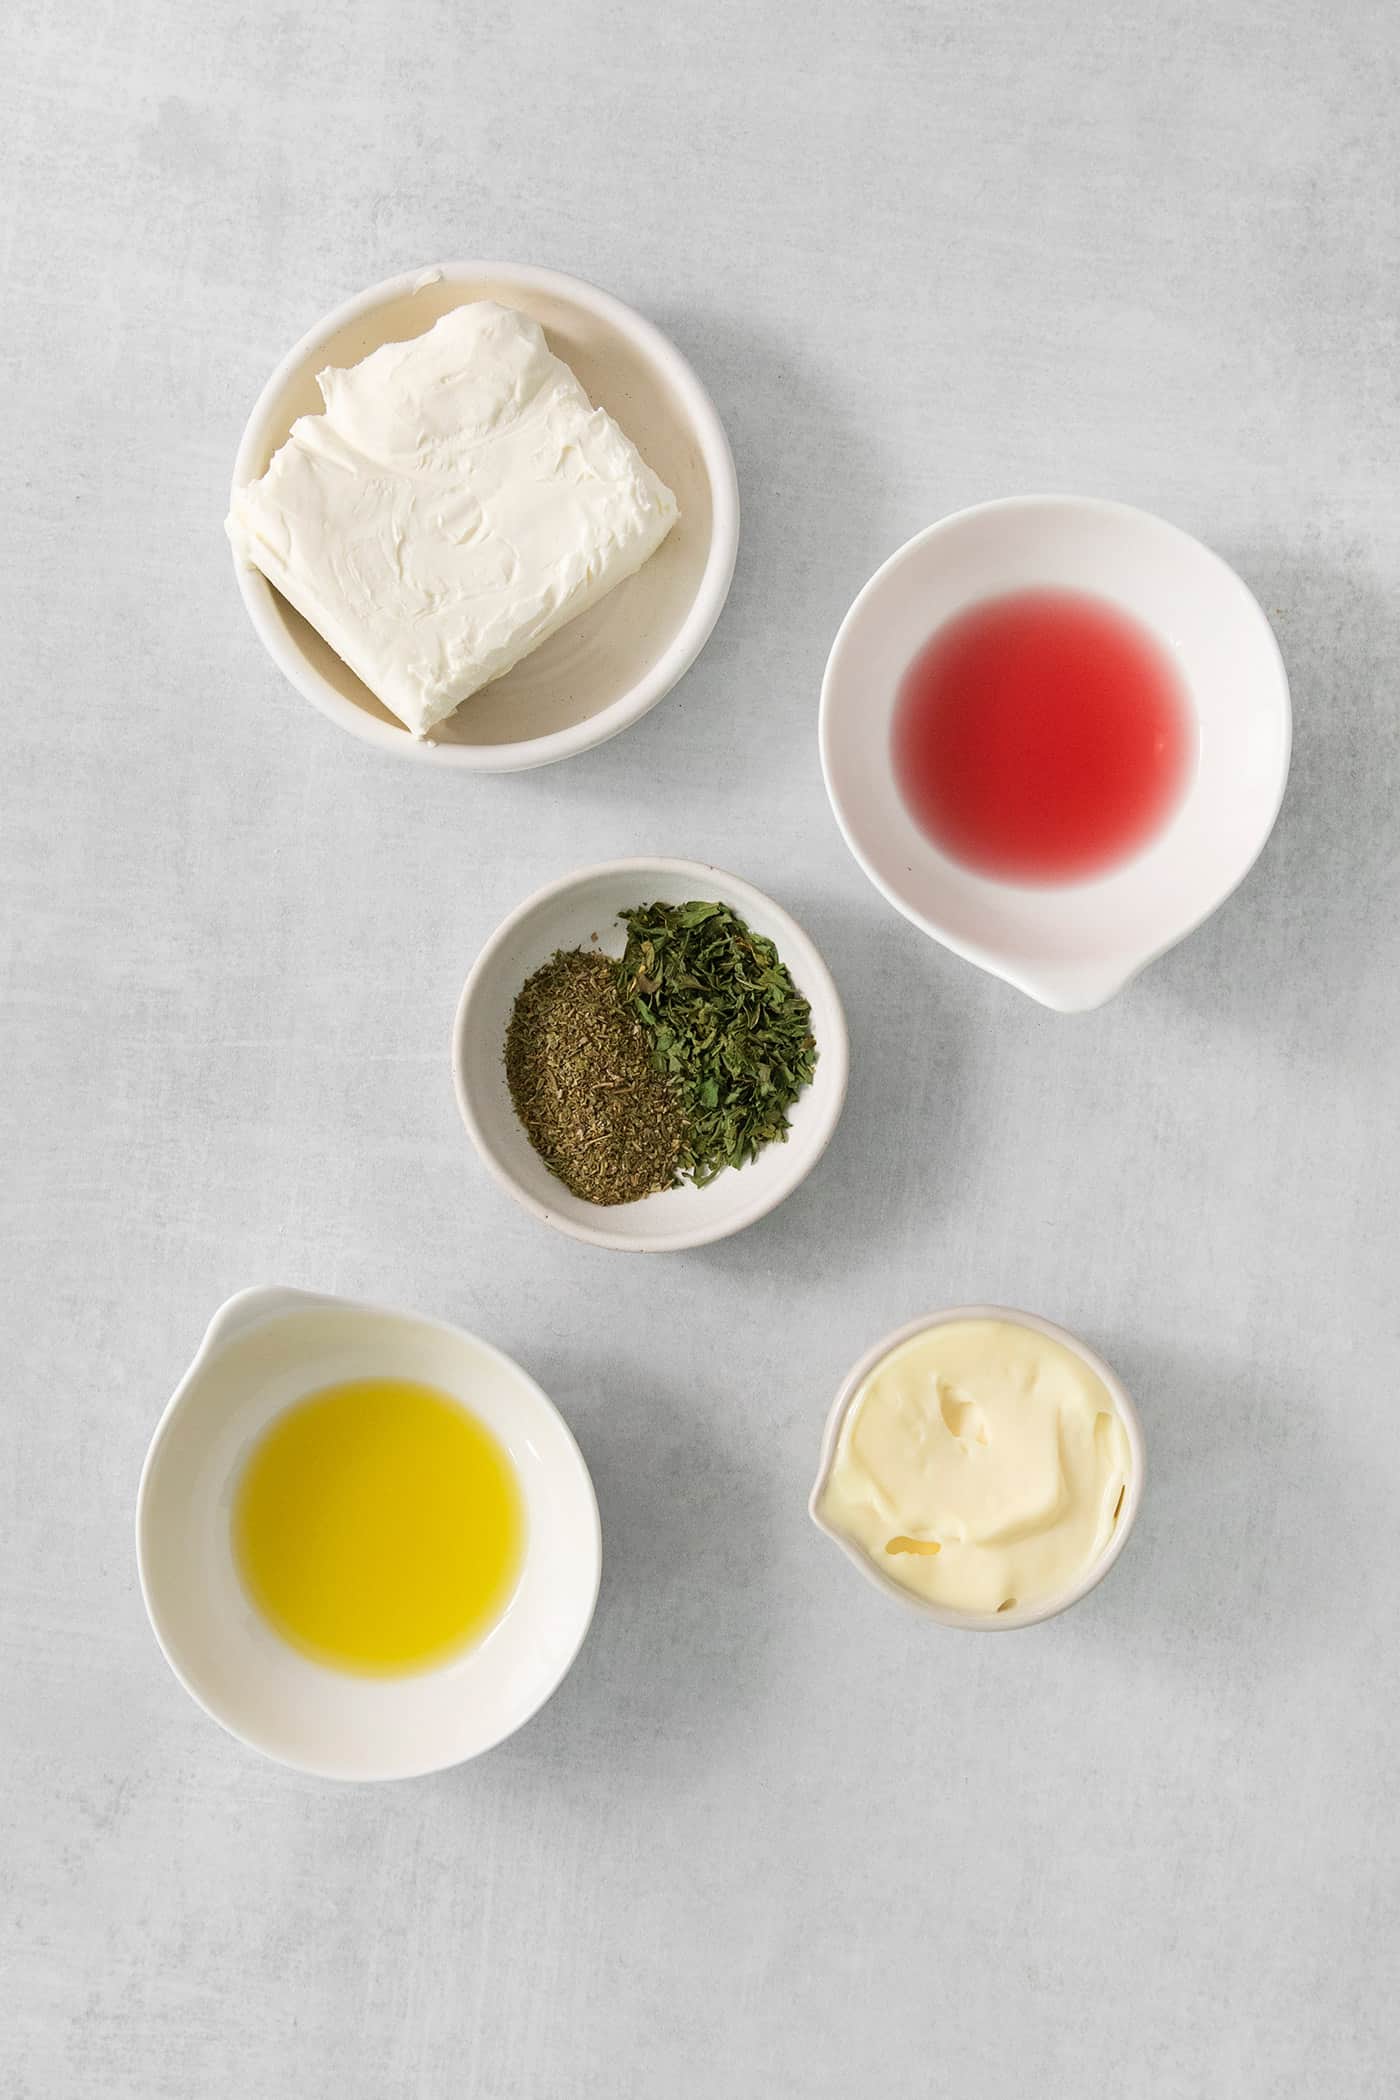 Ingredients for a cream cheese spread are shown in white bowls: cream cheese, red wine vinegar, oil, mayo, and spices.